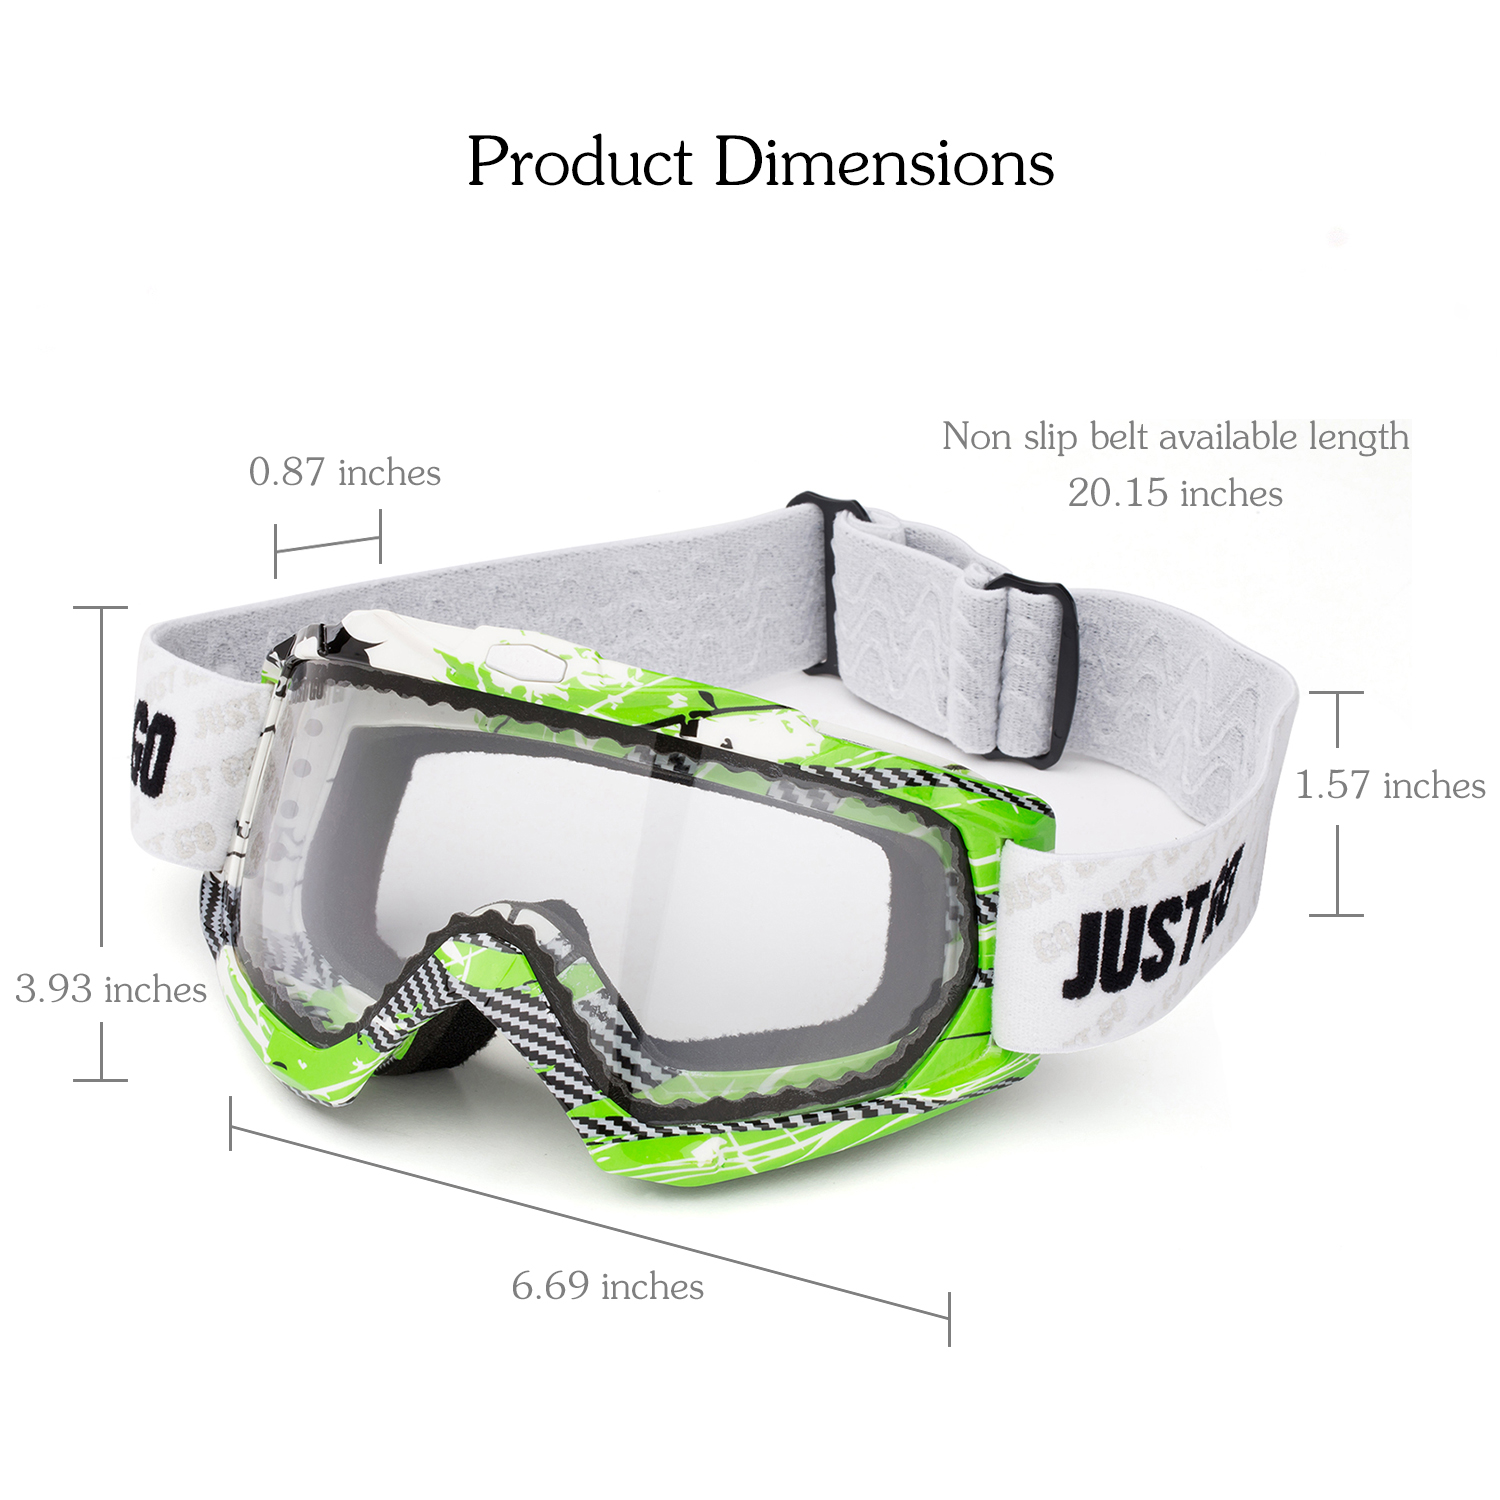 JUST GO Ski Goggles for Skiing Motorcycling and Winter Sports Dual-Layer Anti-Fog 100% UV Protection lens Snowboard Goggles fit Men, Women and Youth, Green and White Frame/ Clear Lens (VLT 81.2%) - image 3 of 9